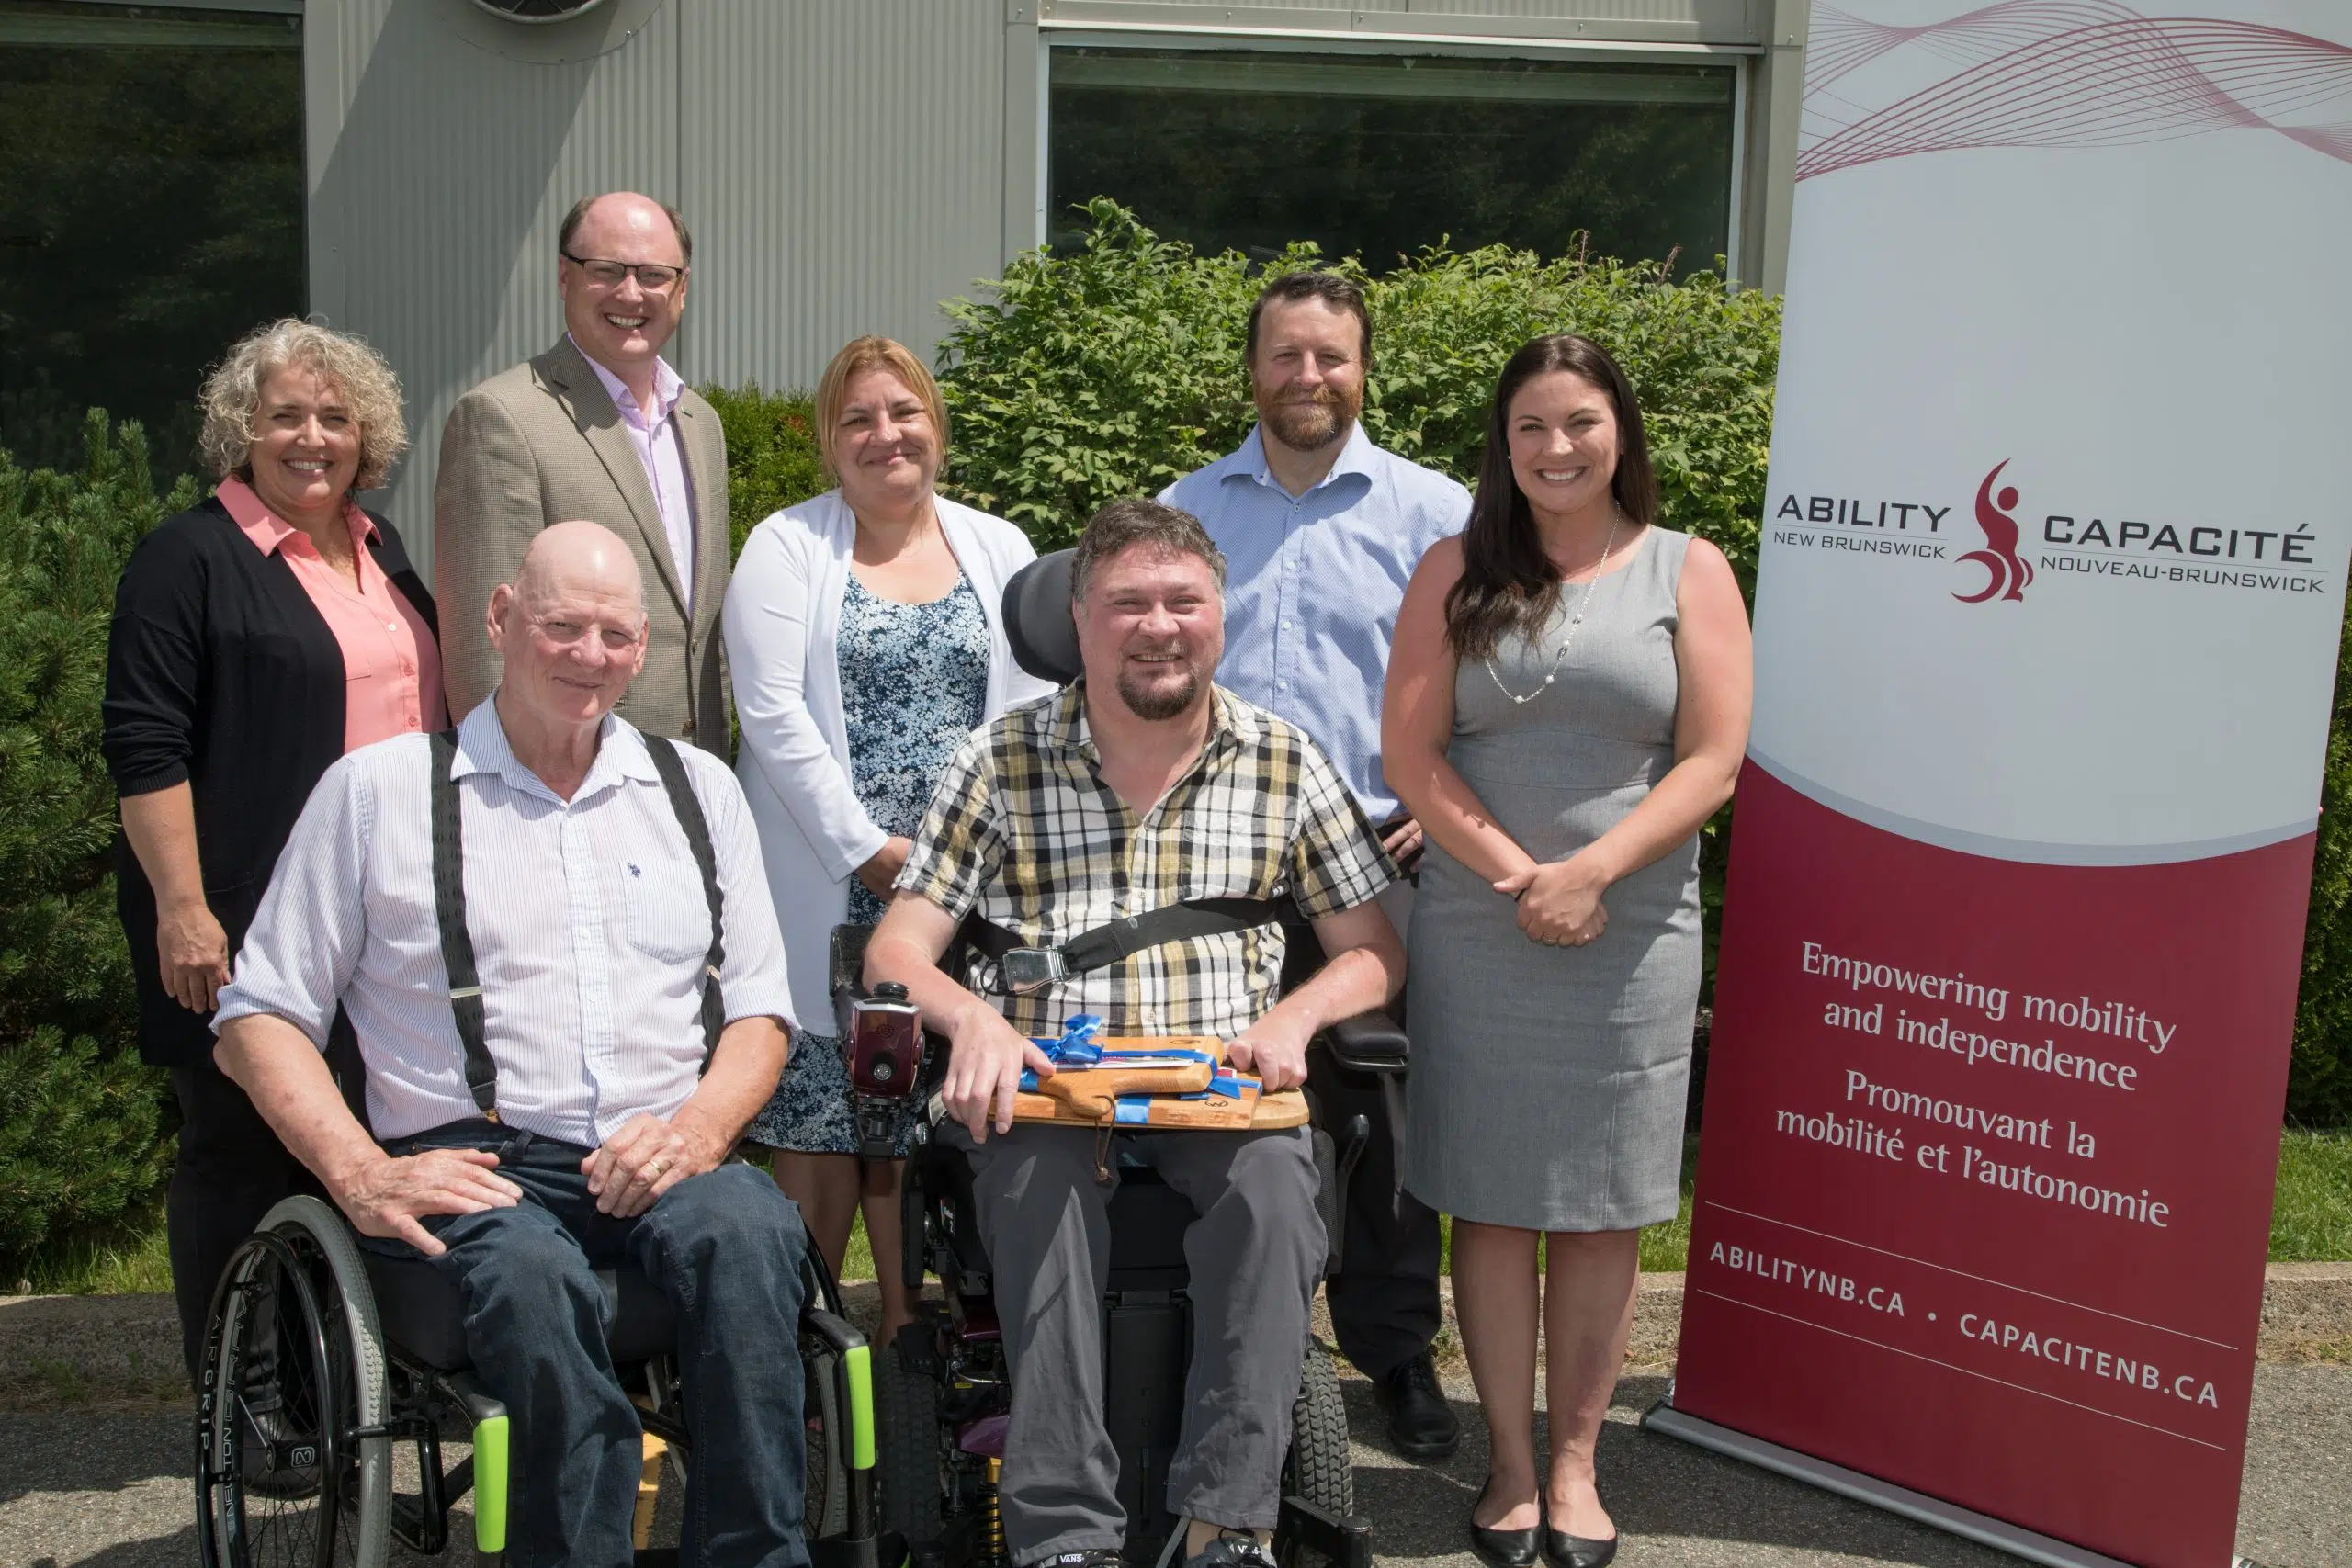 $1M For Ability NB Accessible Review Pilot